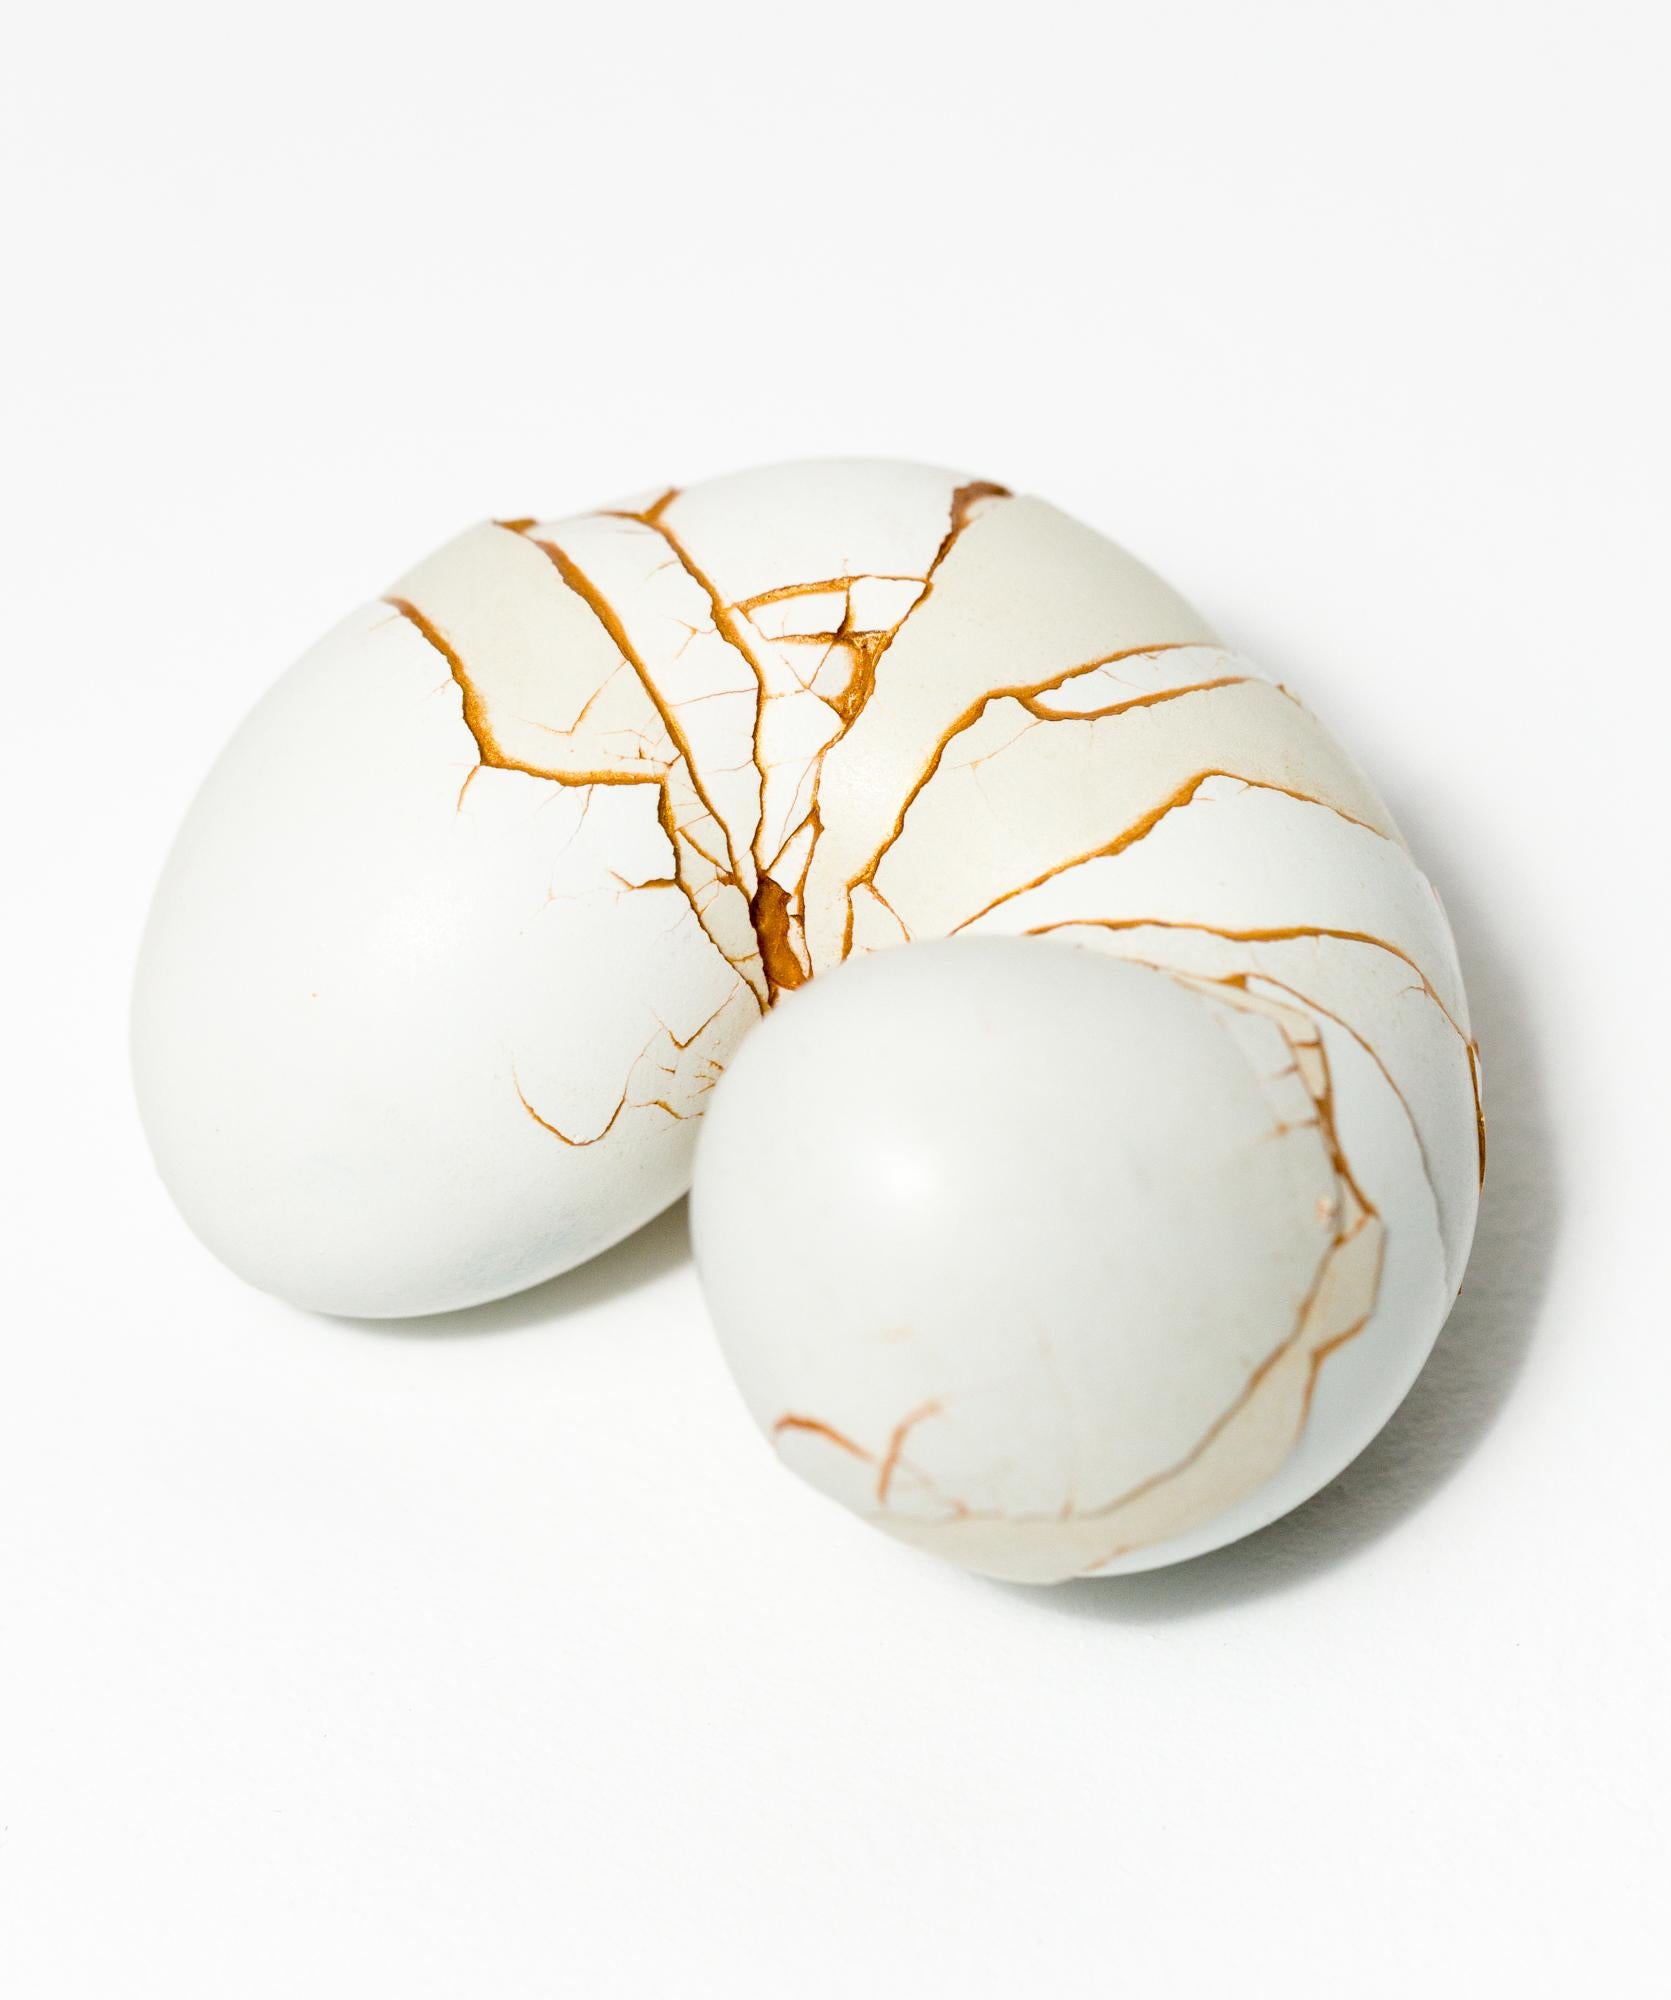 This piece titled "Roly-Poly" is an original piece by Kate VanVliet and is made from eggshells, mica, and PVA. This piece measures 4”h x 3.5”w x 2.5”d.

Kate VanVliet is a sculptor and printmaker practicing from her home studio in Elkins Park, PA,